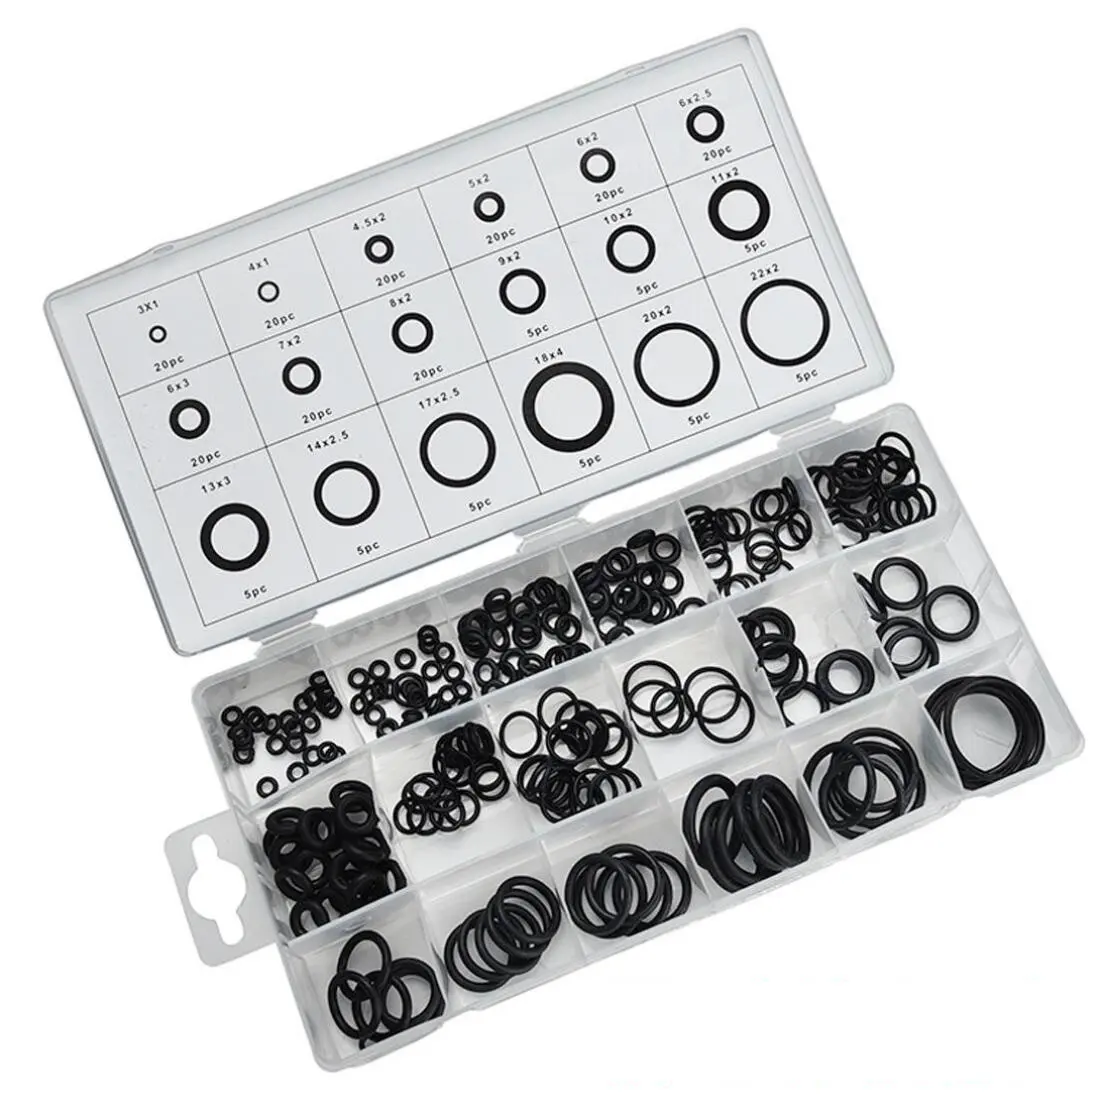 270 PCS Rubber O-Ring Assortment Set Sealing Gasket Washer Seal For Car Air Conditioner